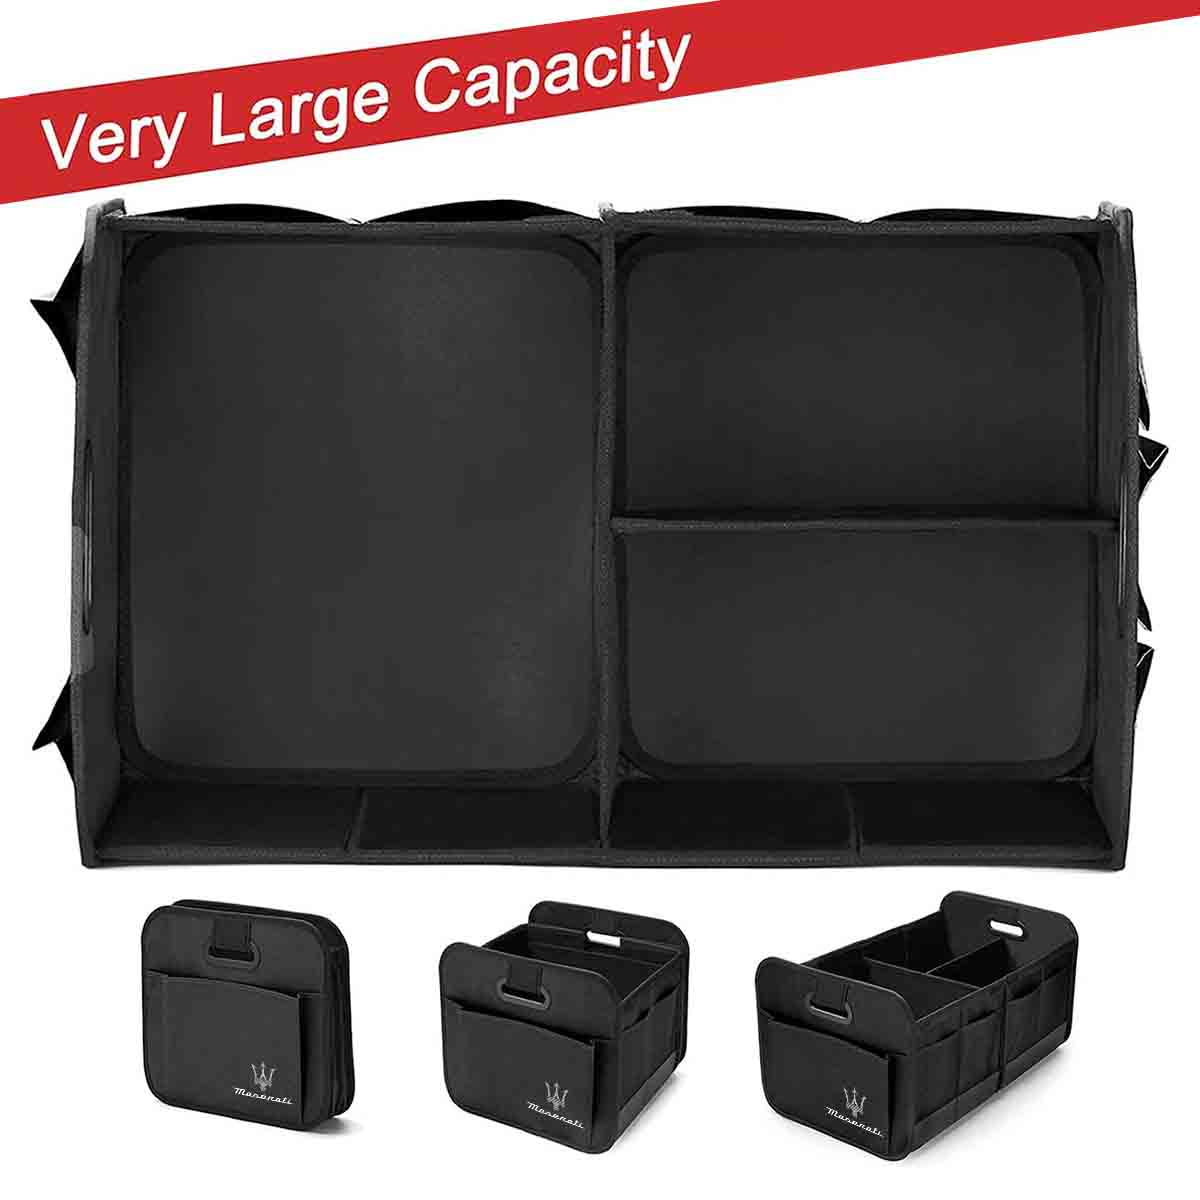 Trunk Organizer, Car Storage, Custom For Your Cars, Reinforced Handles, Collapsible Multi, Compartment Car Organizers, Foldable and Waterproof, 600D Oxford Polyester MS12995